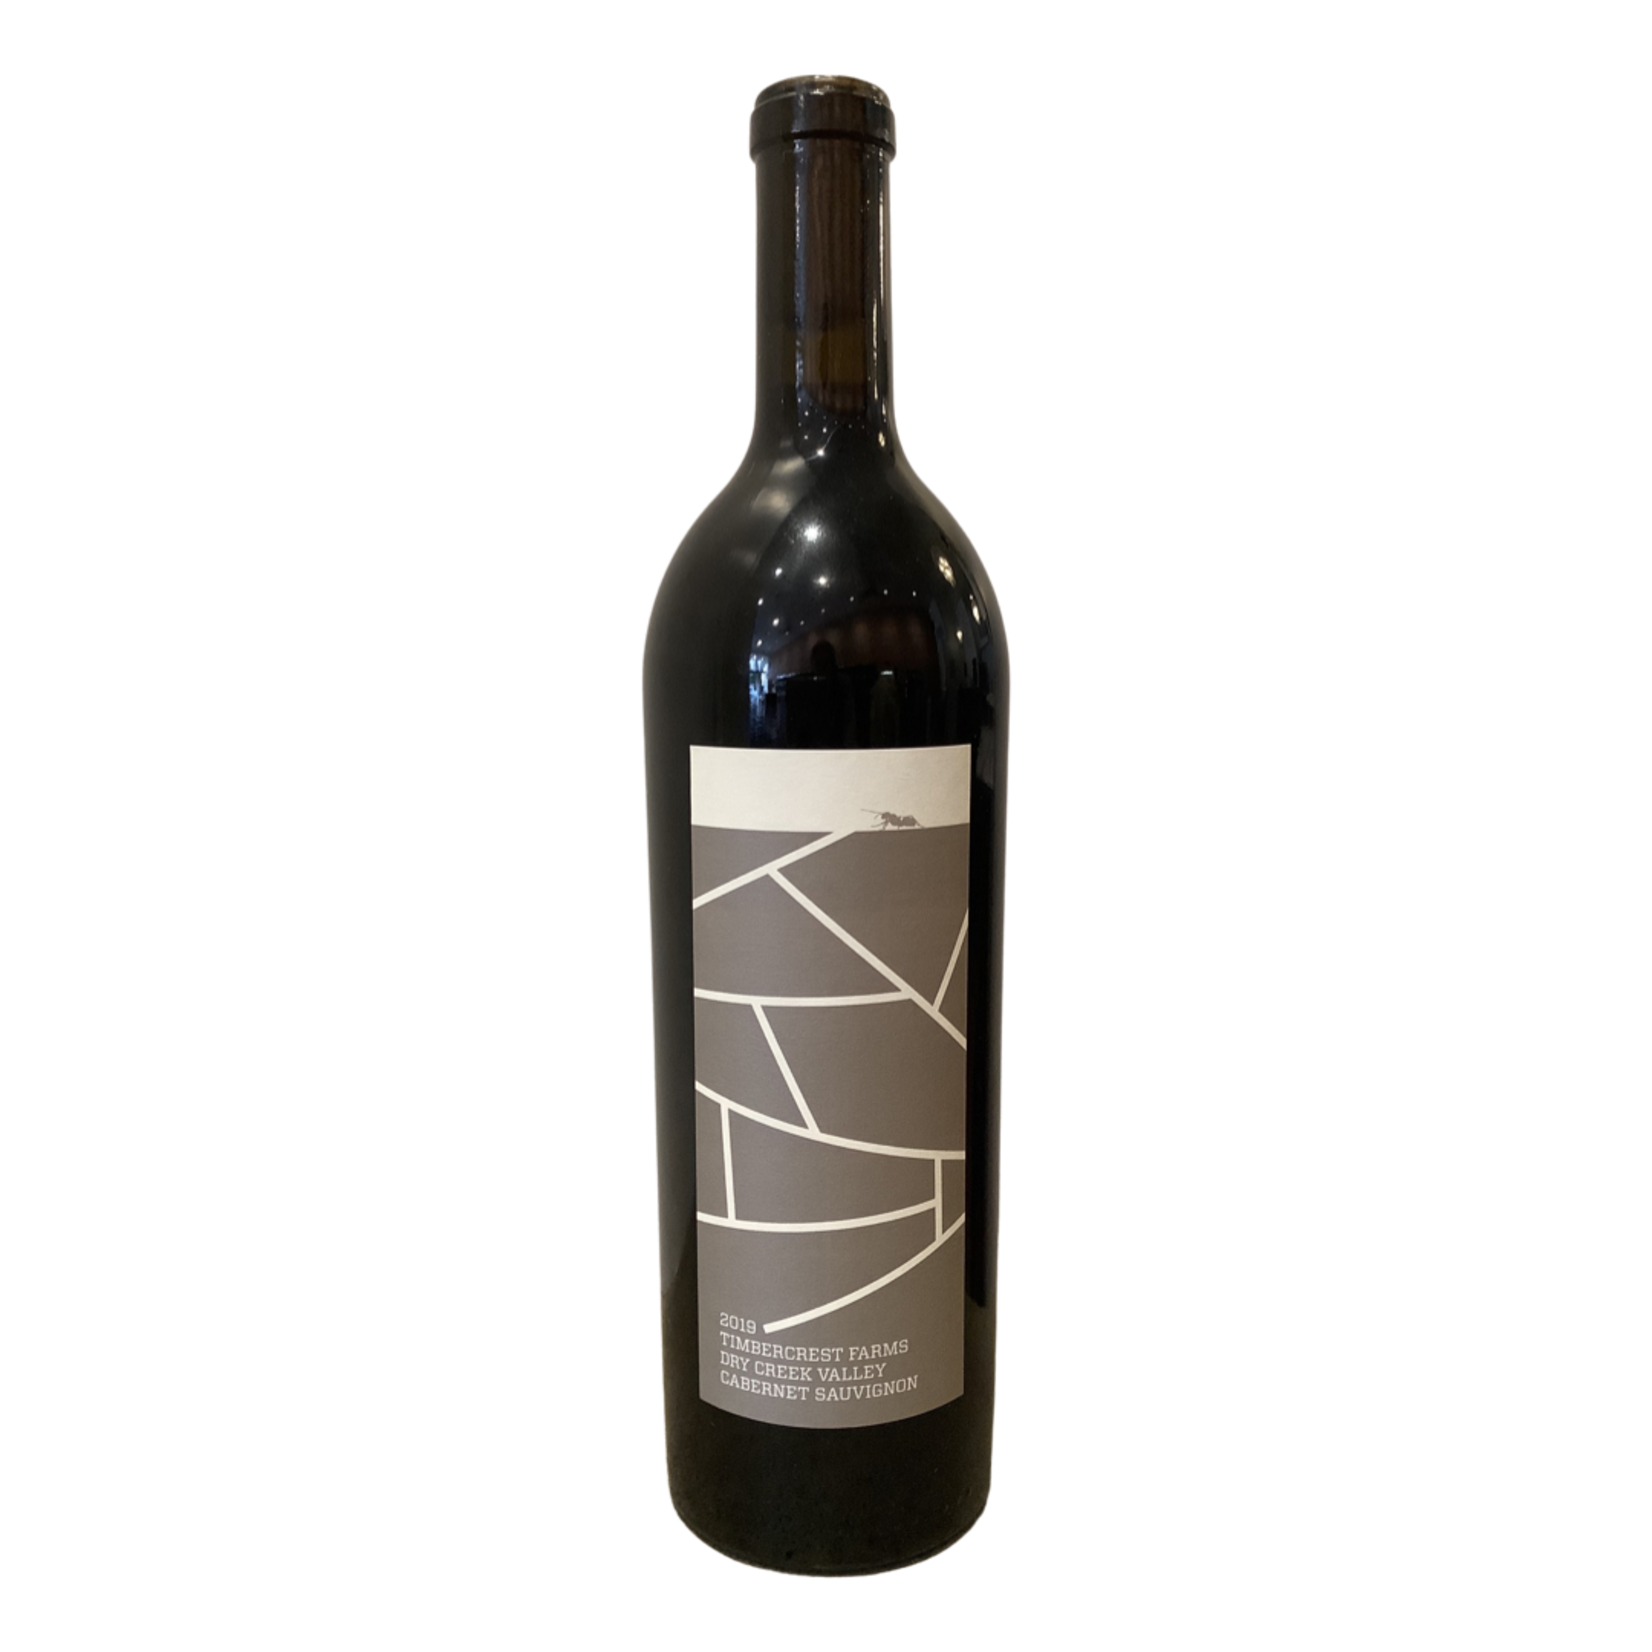 2019 Anthill Farms "Timbercrest Farms" Cabernet Sauvignon, Dry Creek Valley CA